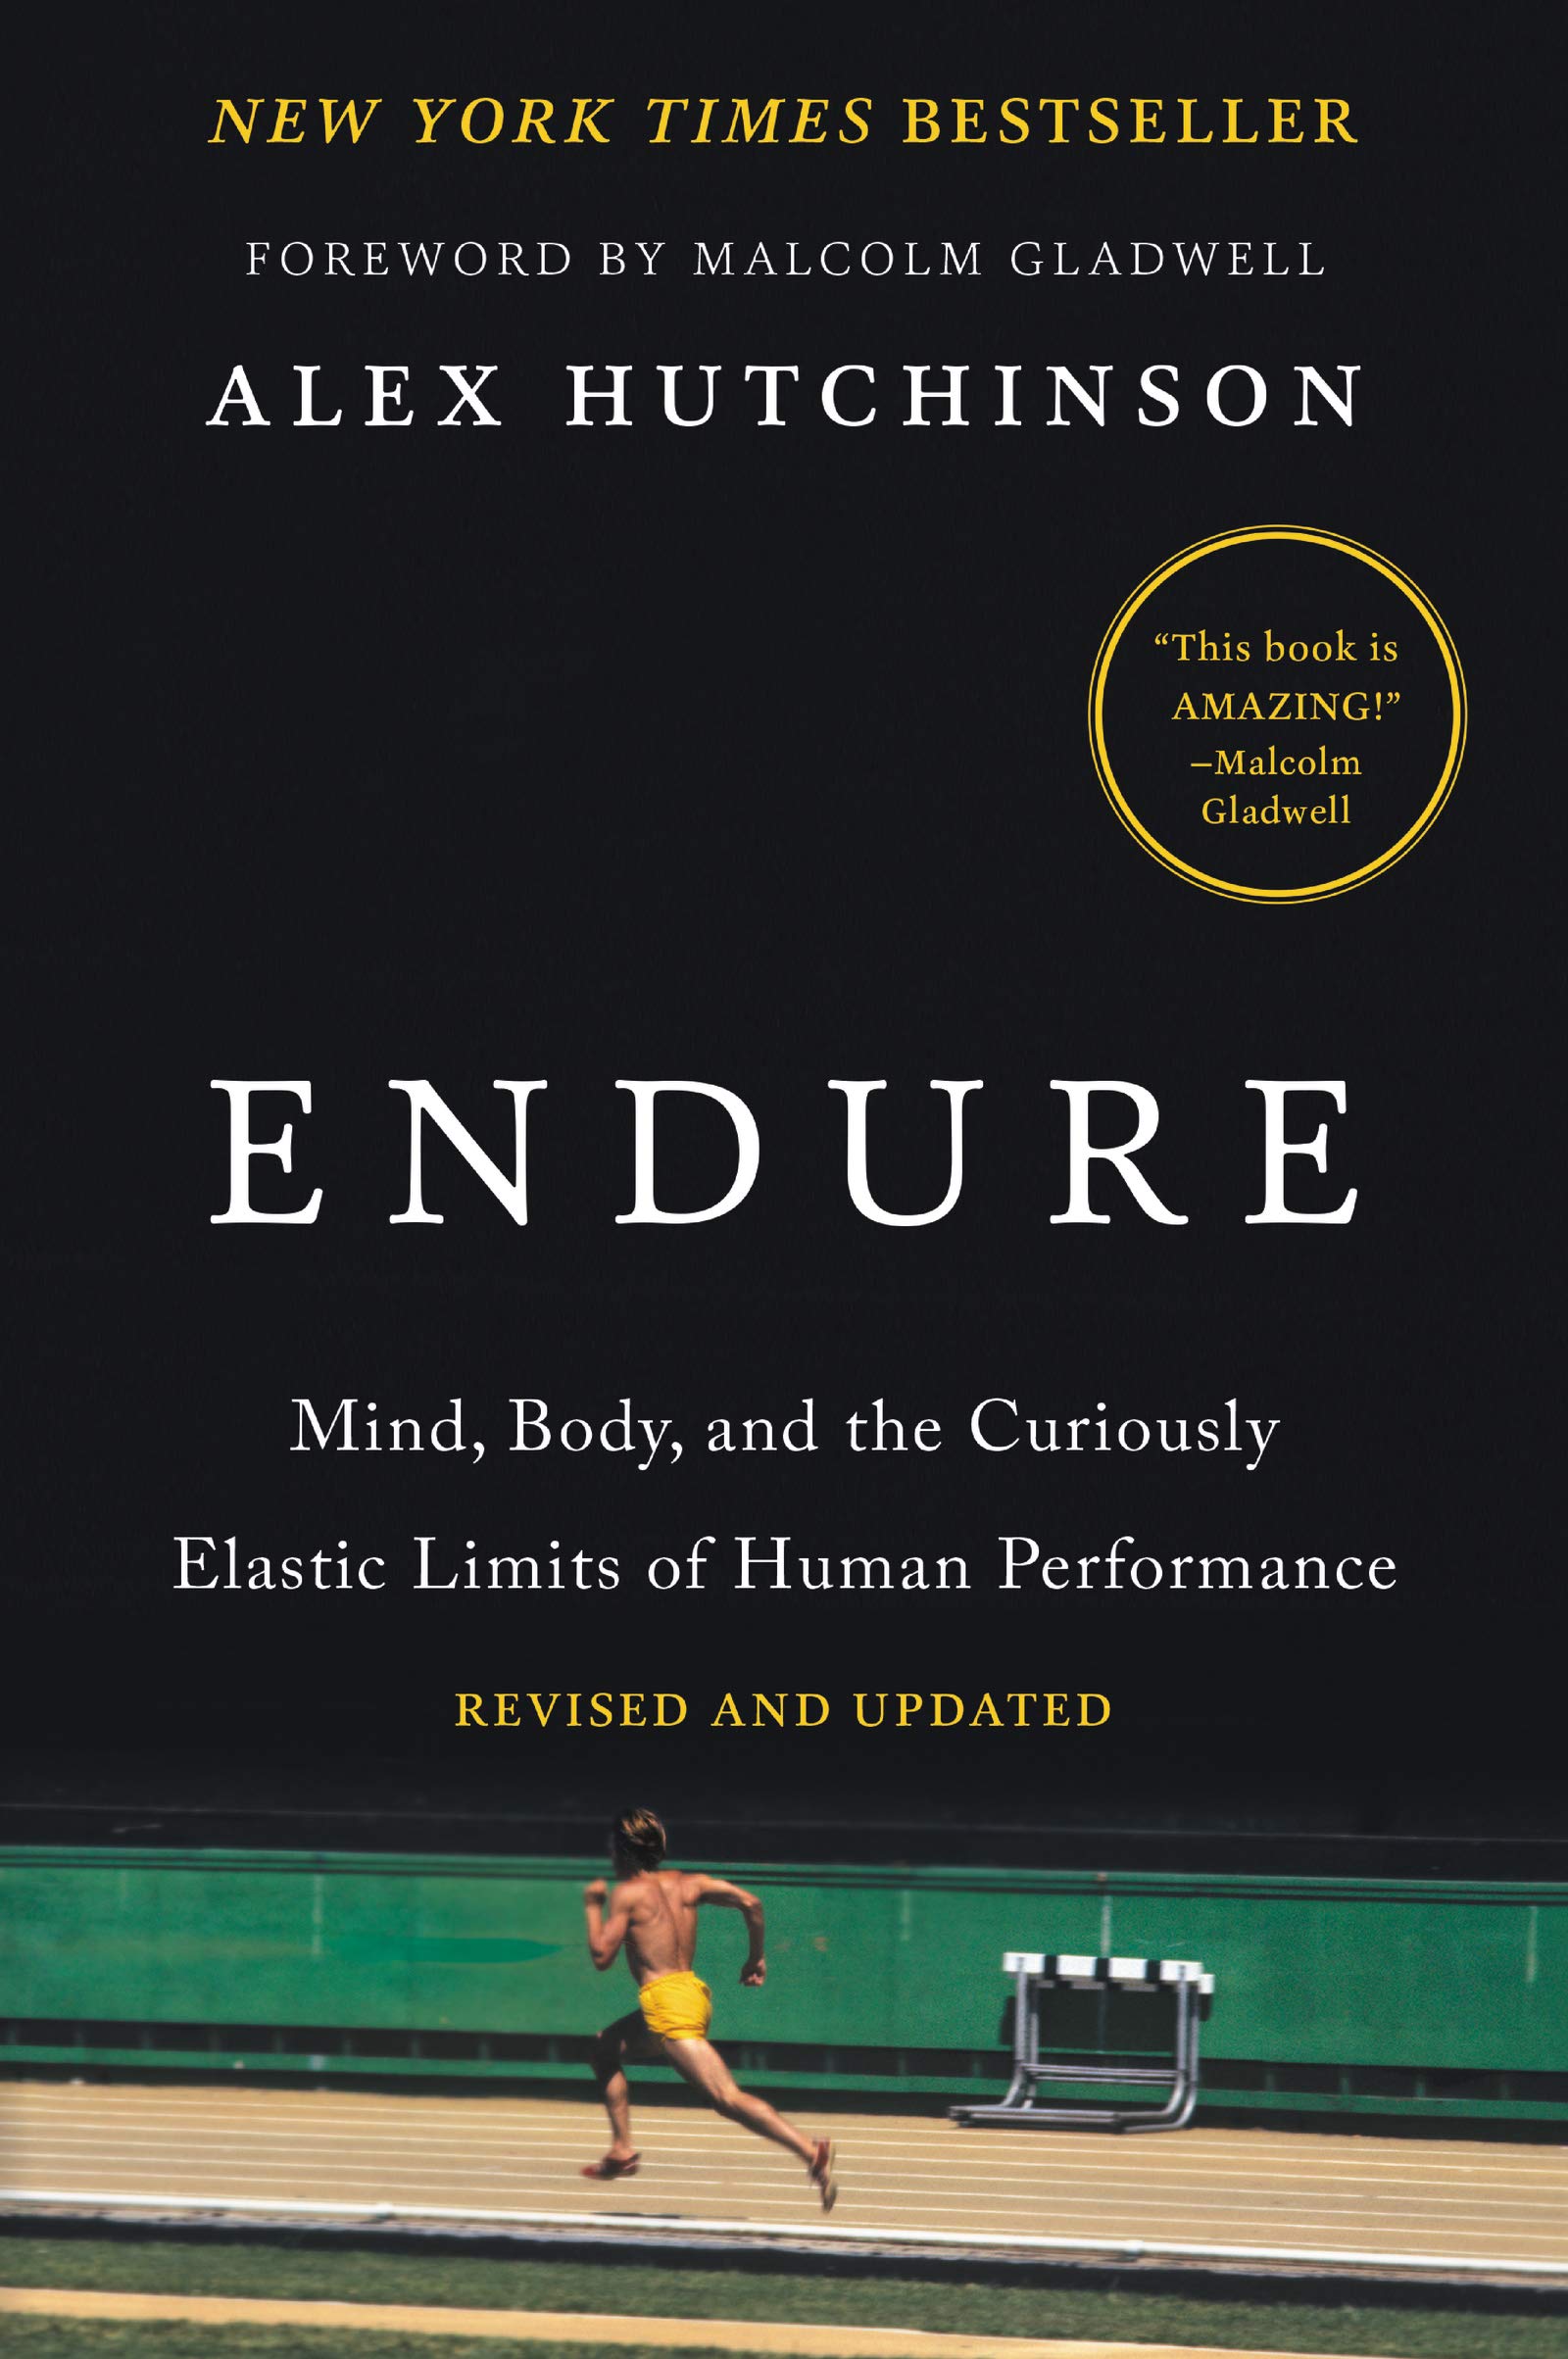 Endure: Mind, Body, and the Curiously Elastic Limits of Human Performance by Hutchinson, Alex